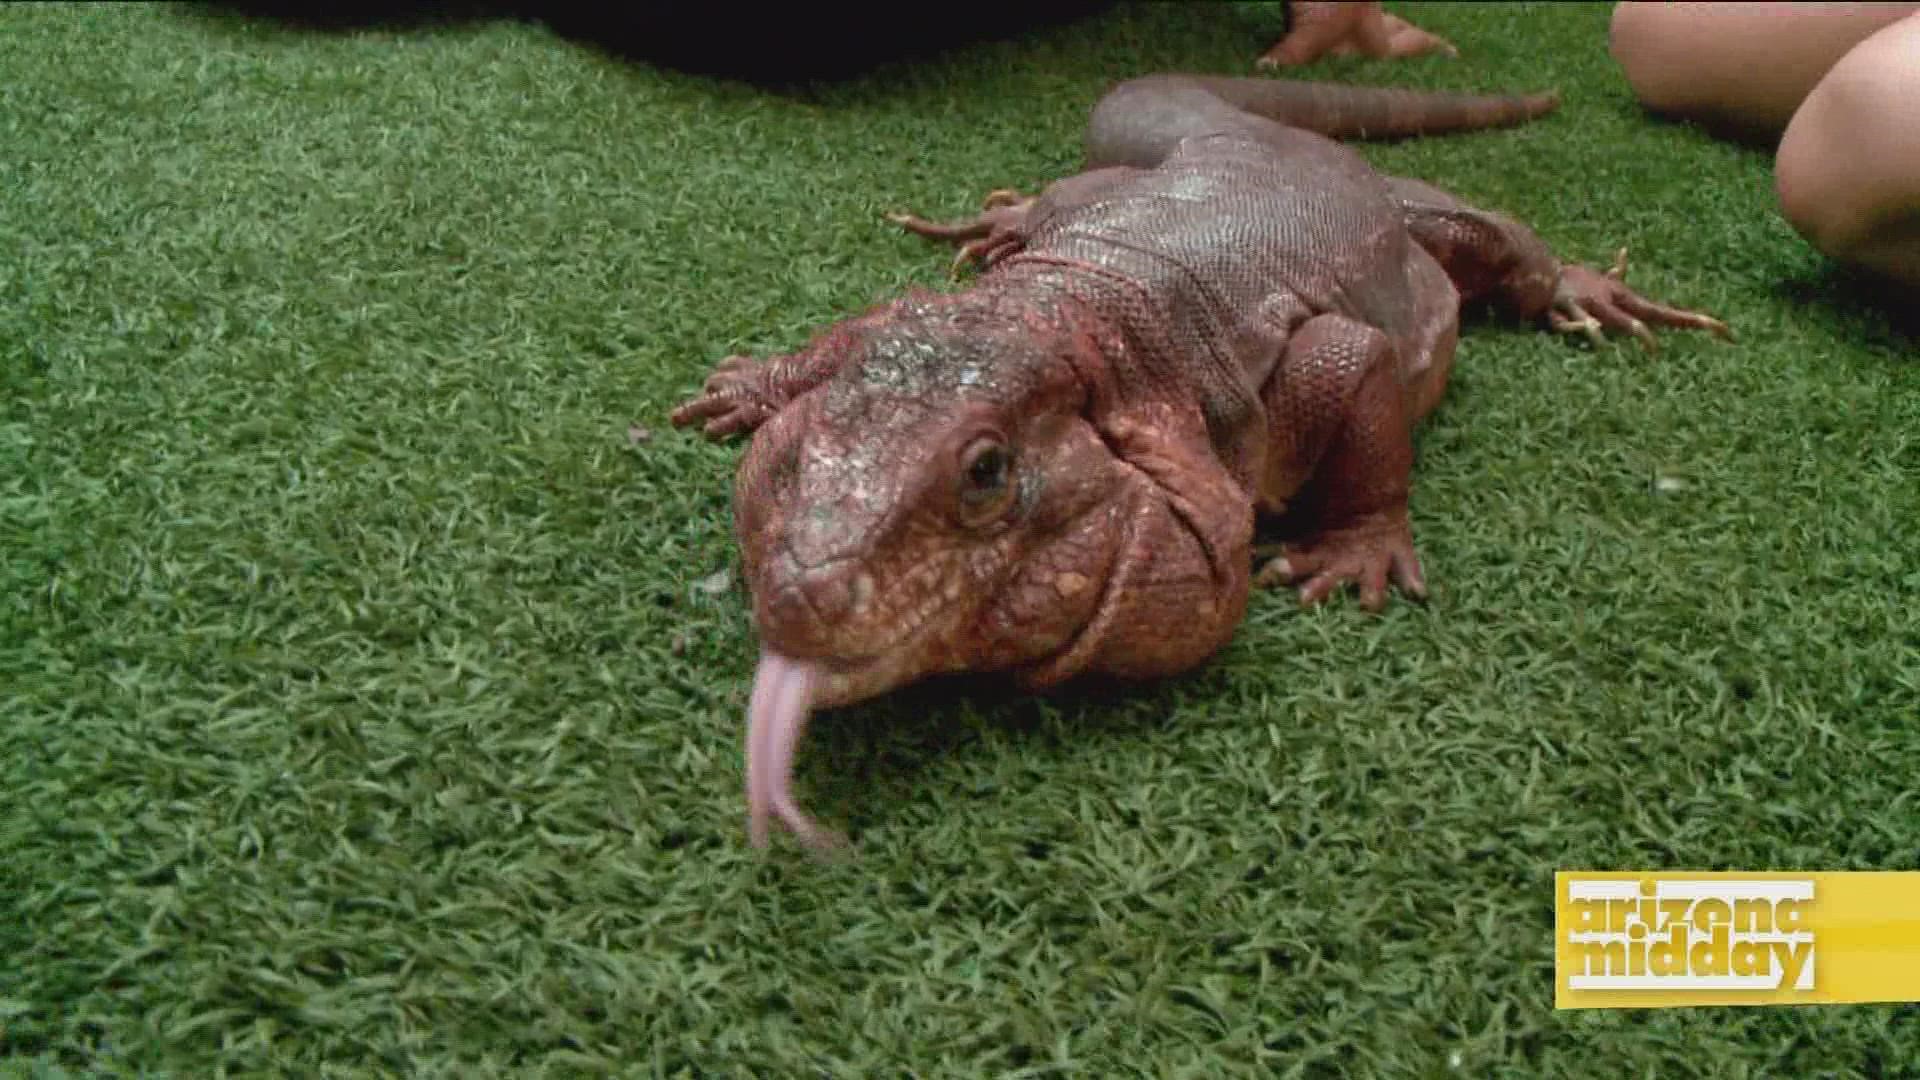 Danielle with the Wildlife World Zoo tells us all about Helios - a red tegu lizard.